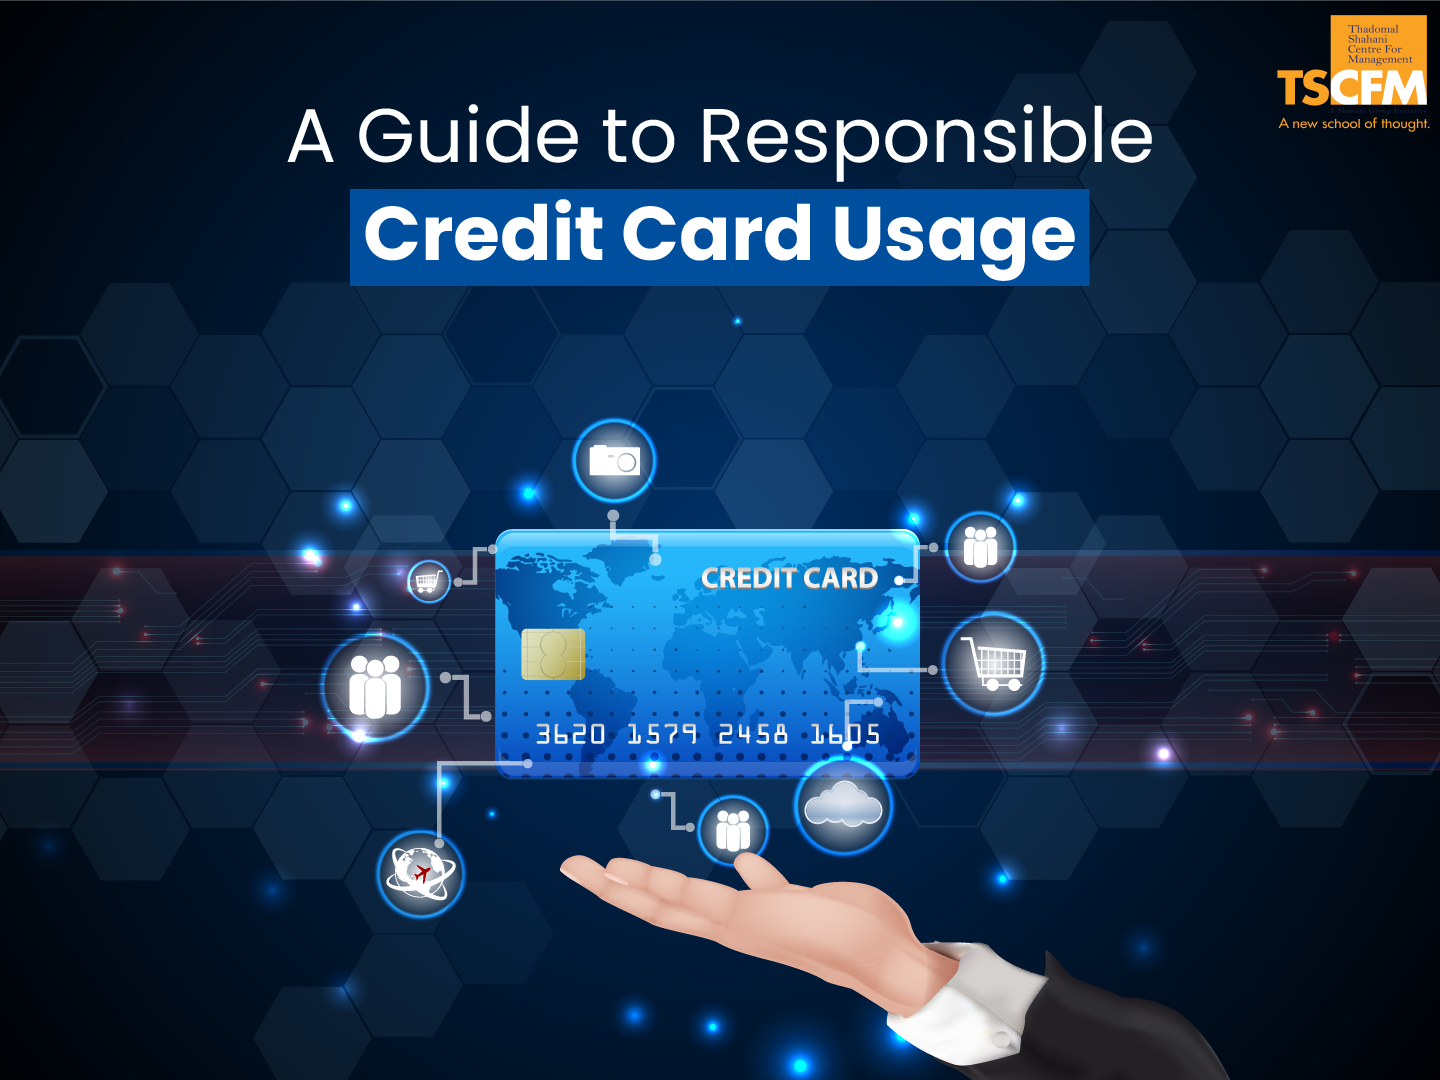 Top 5 Tips for Using a Credit Card Responsibly